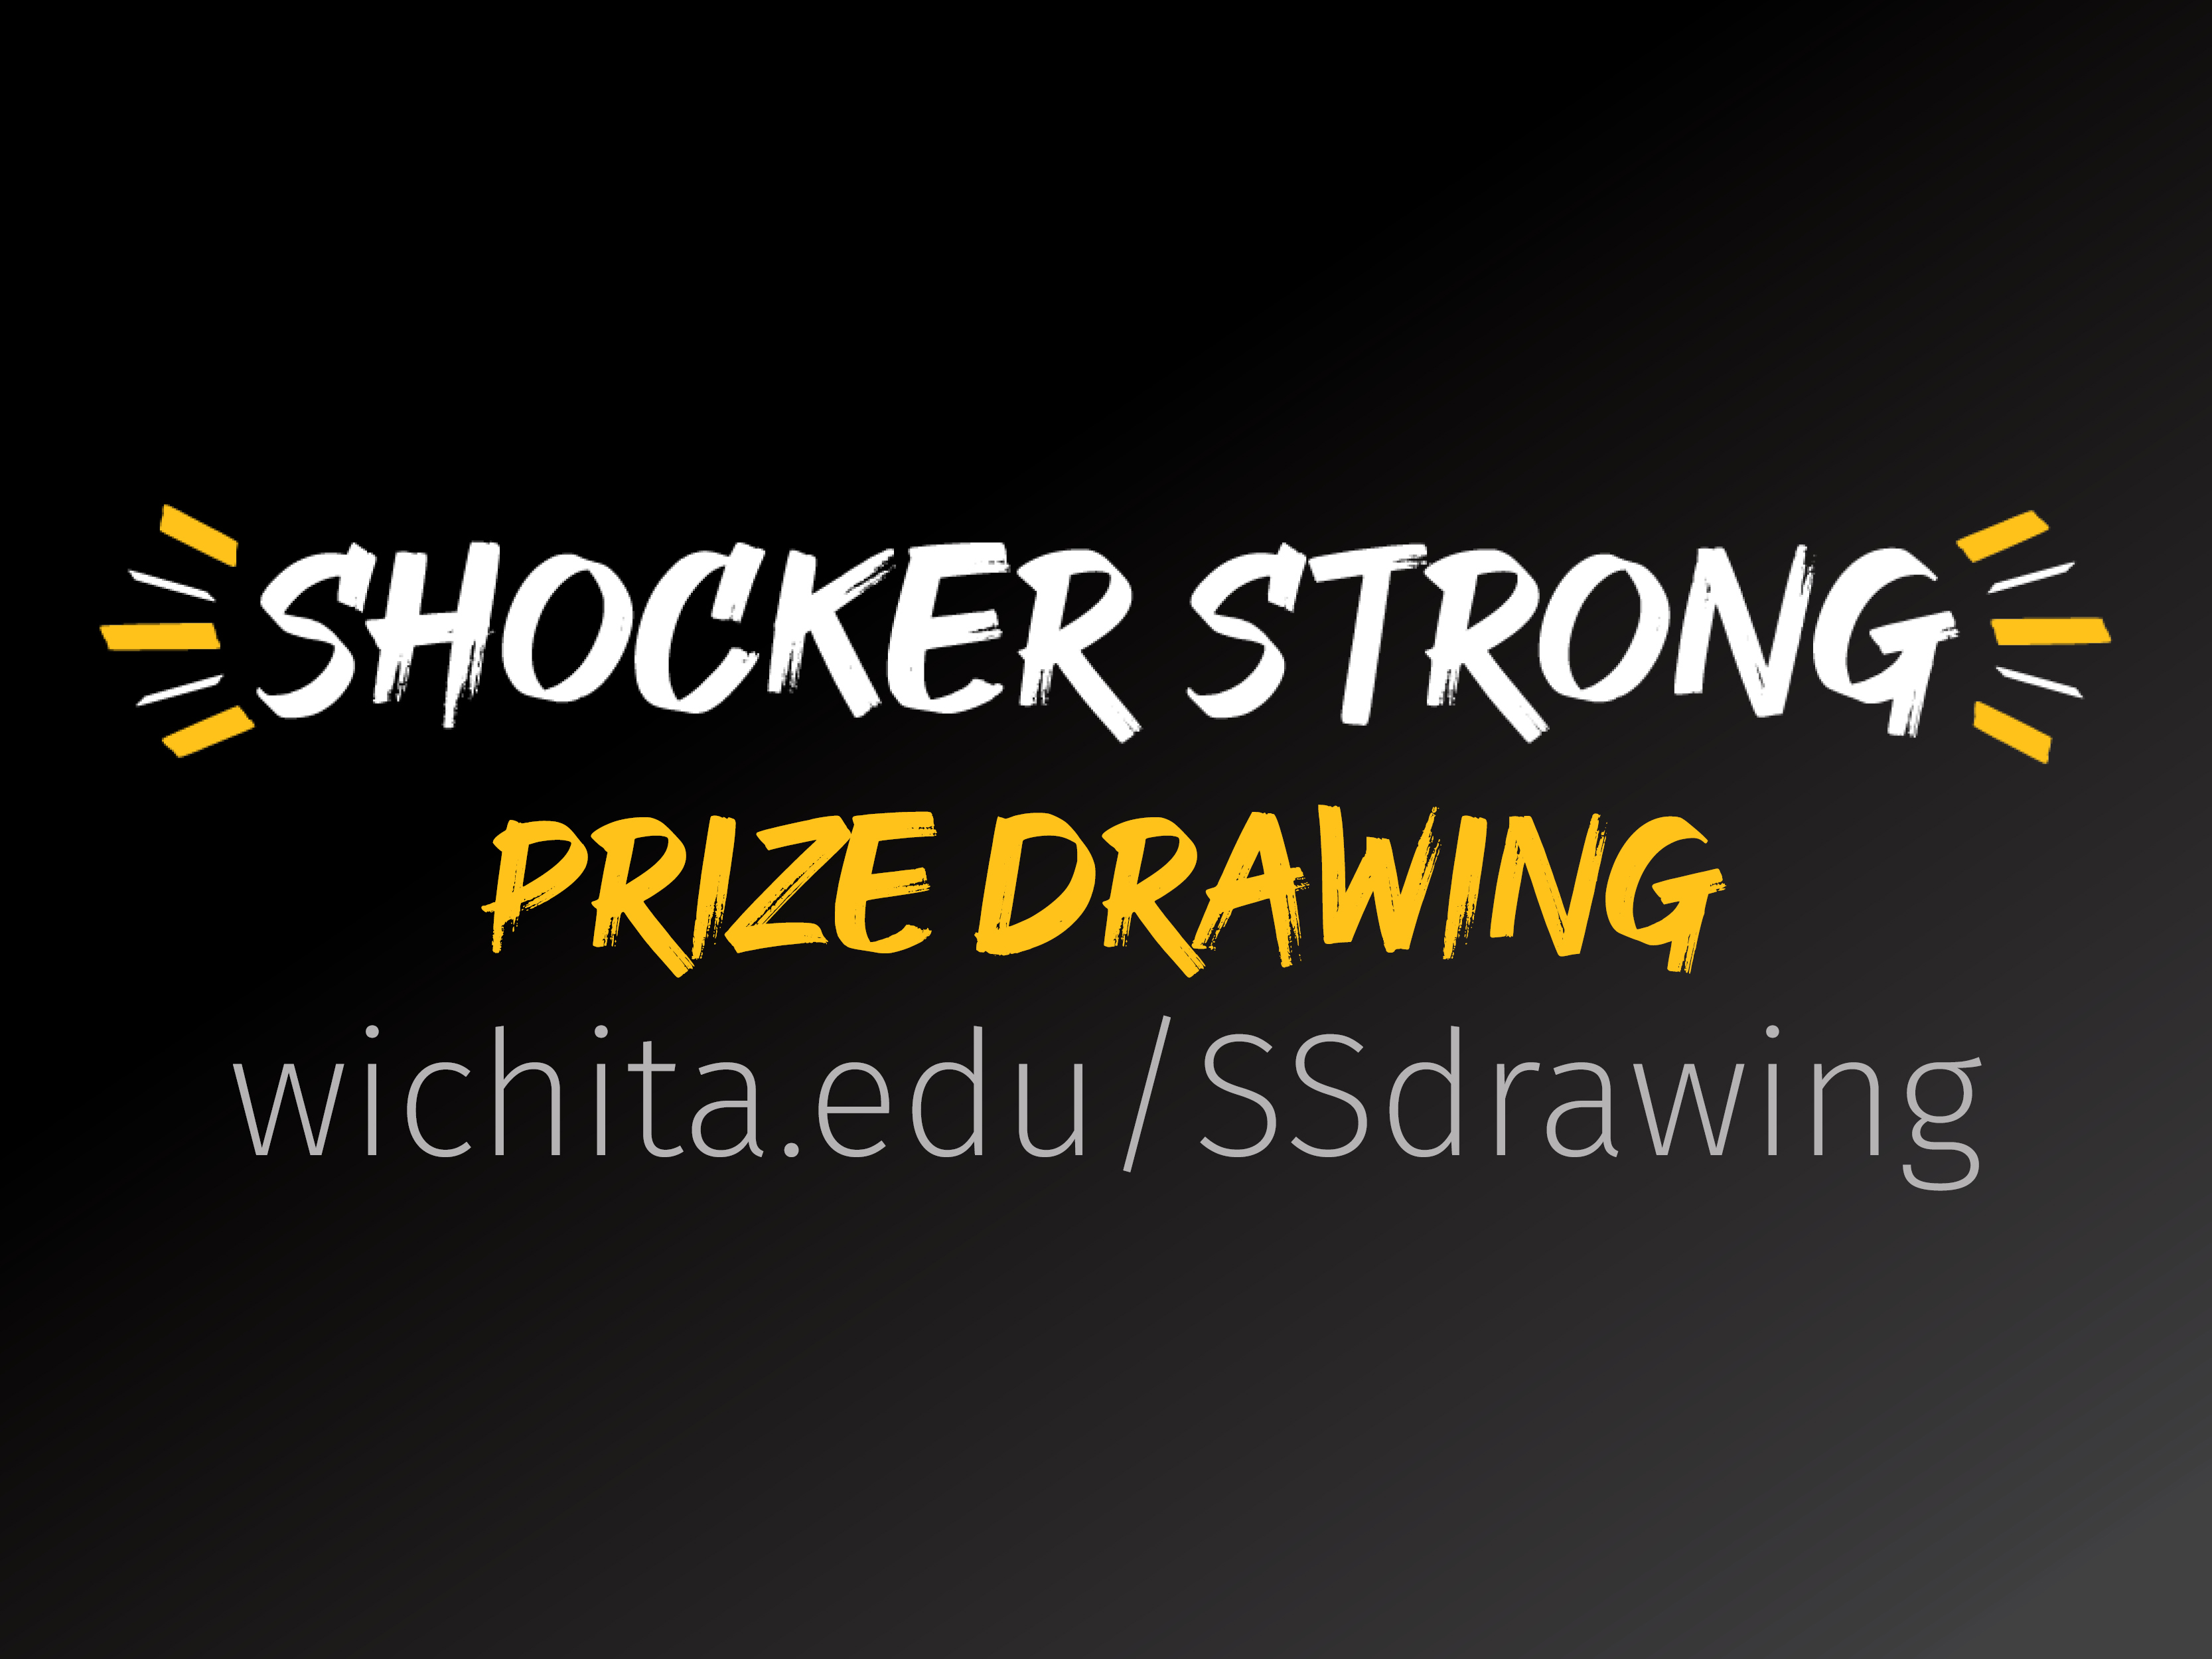 Shocker Strong Prize Drawing